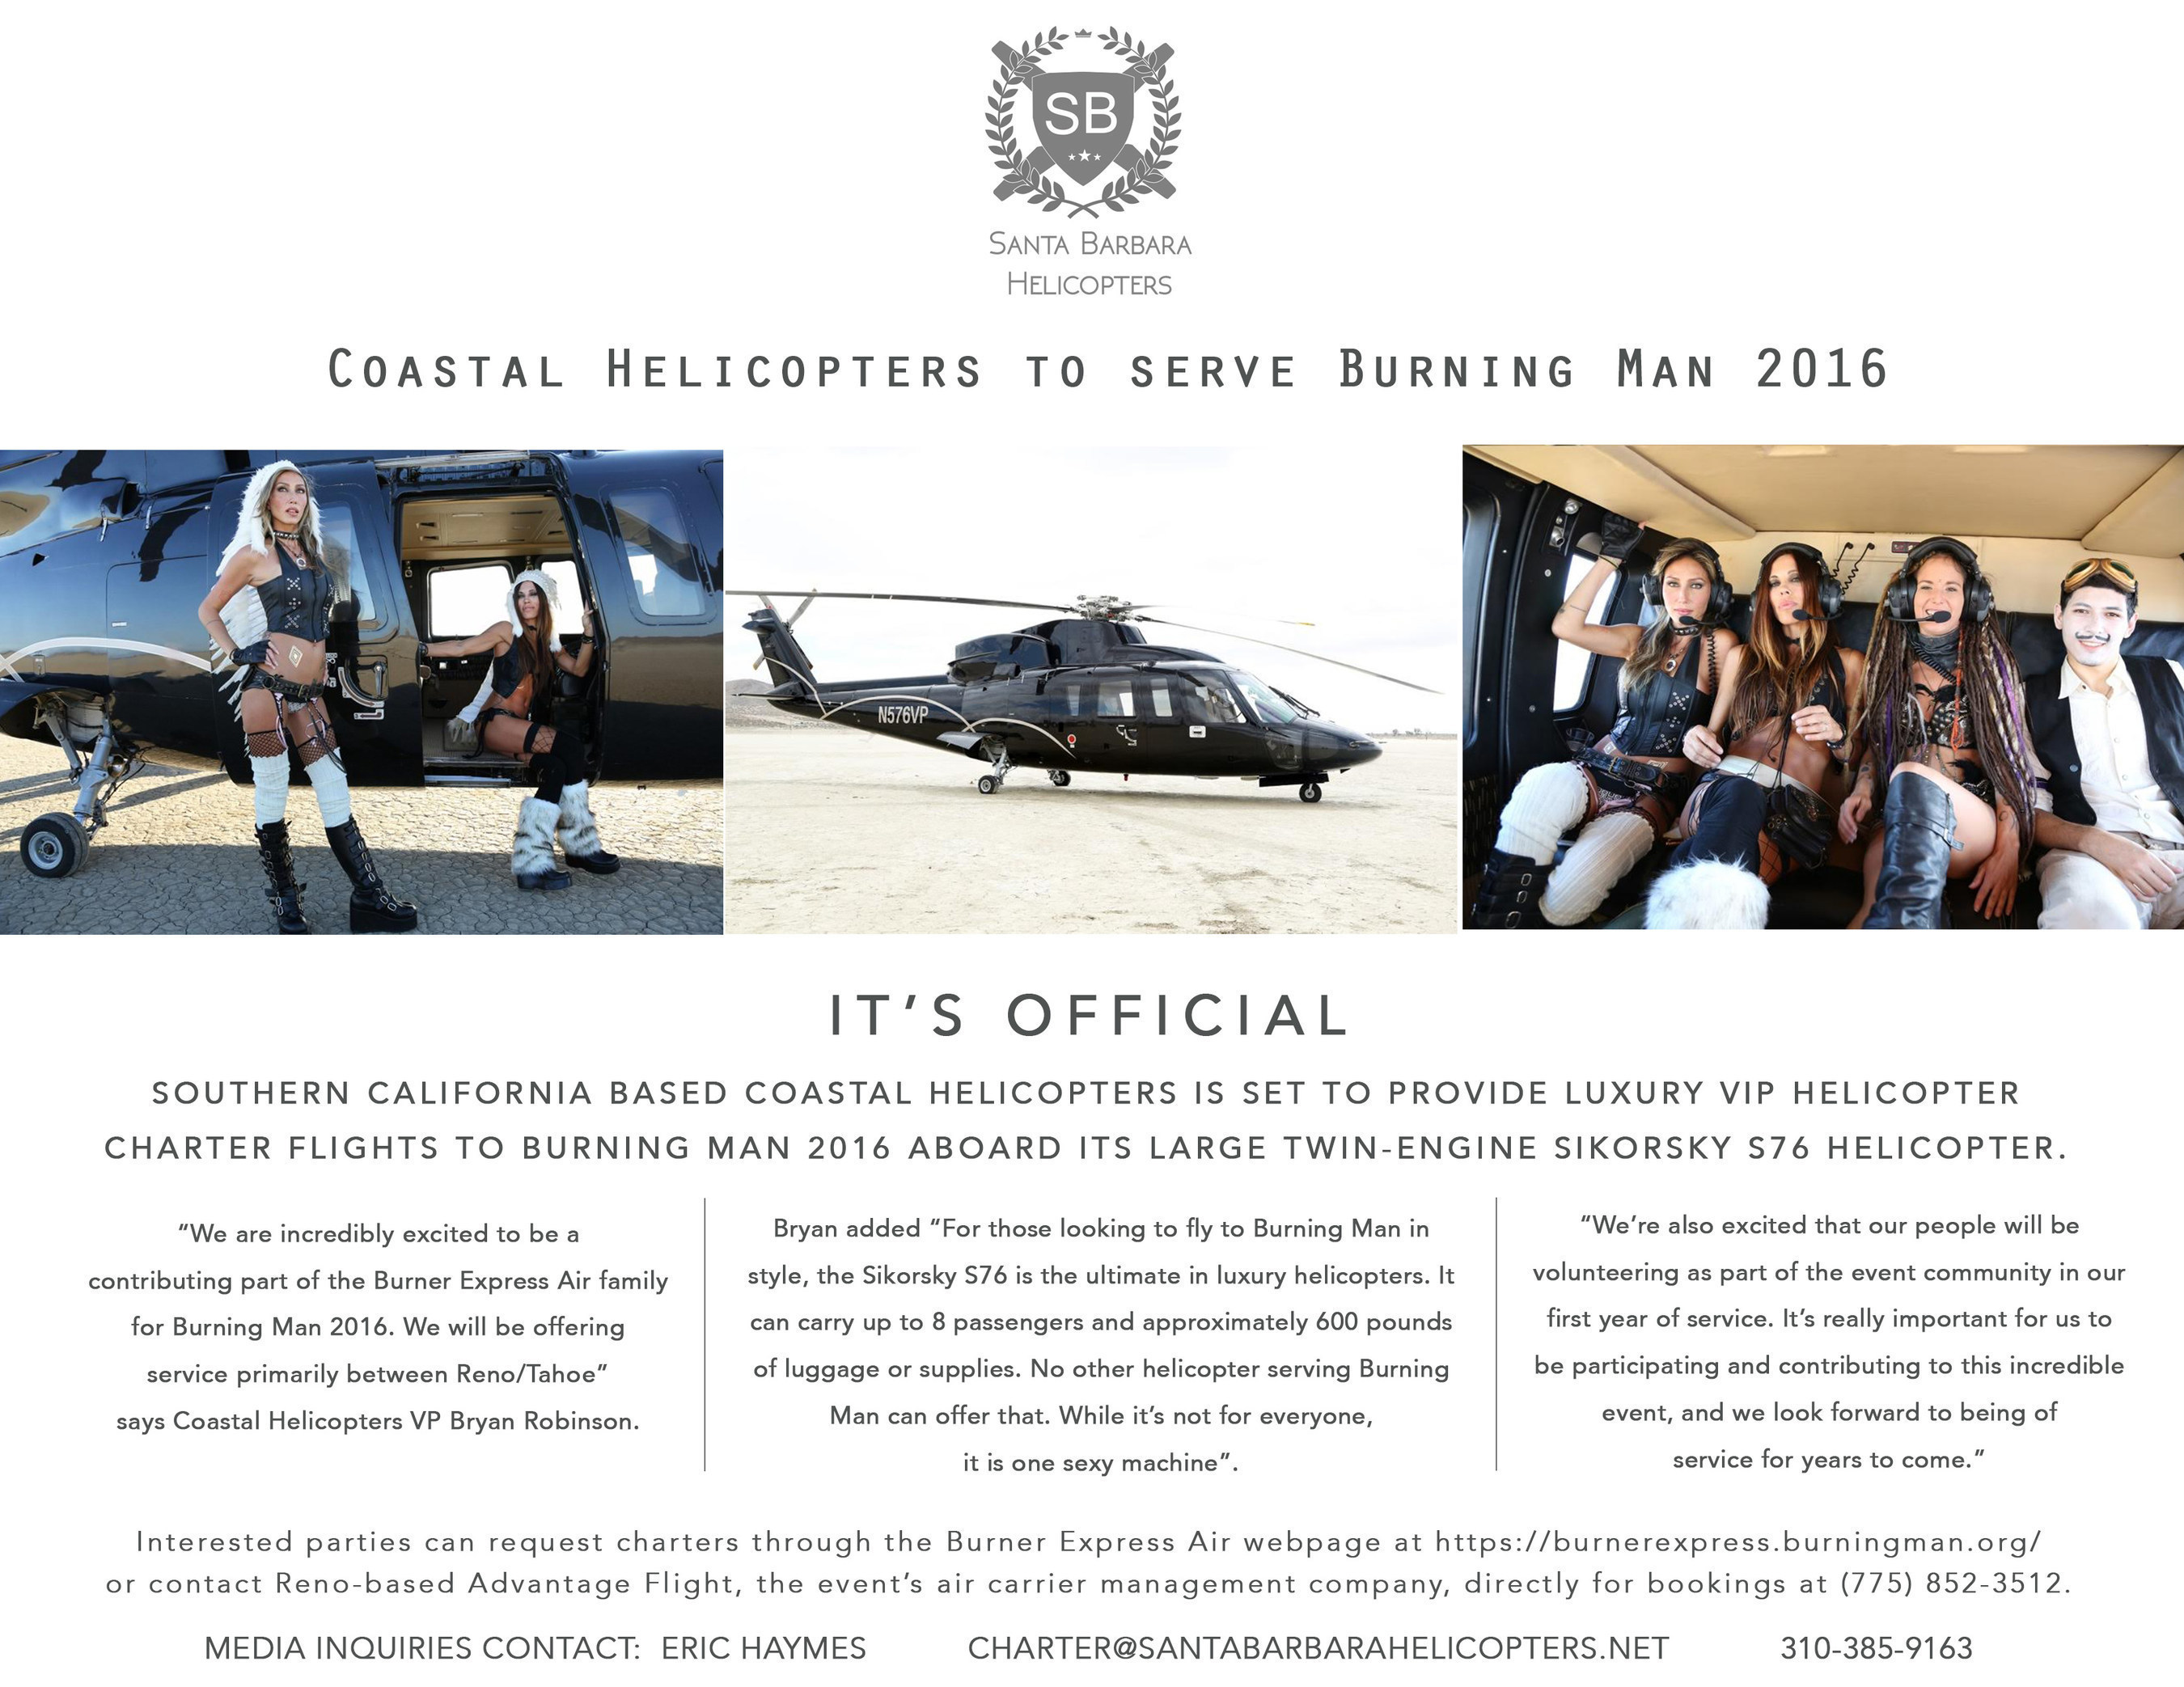 Luxury VIP helicopter charter flights to Burning Man 2016